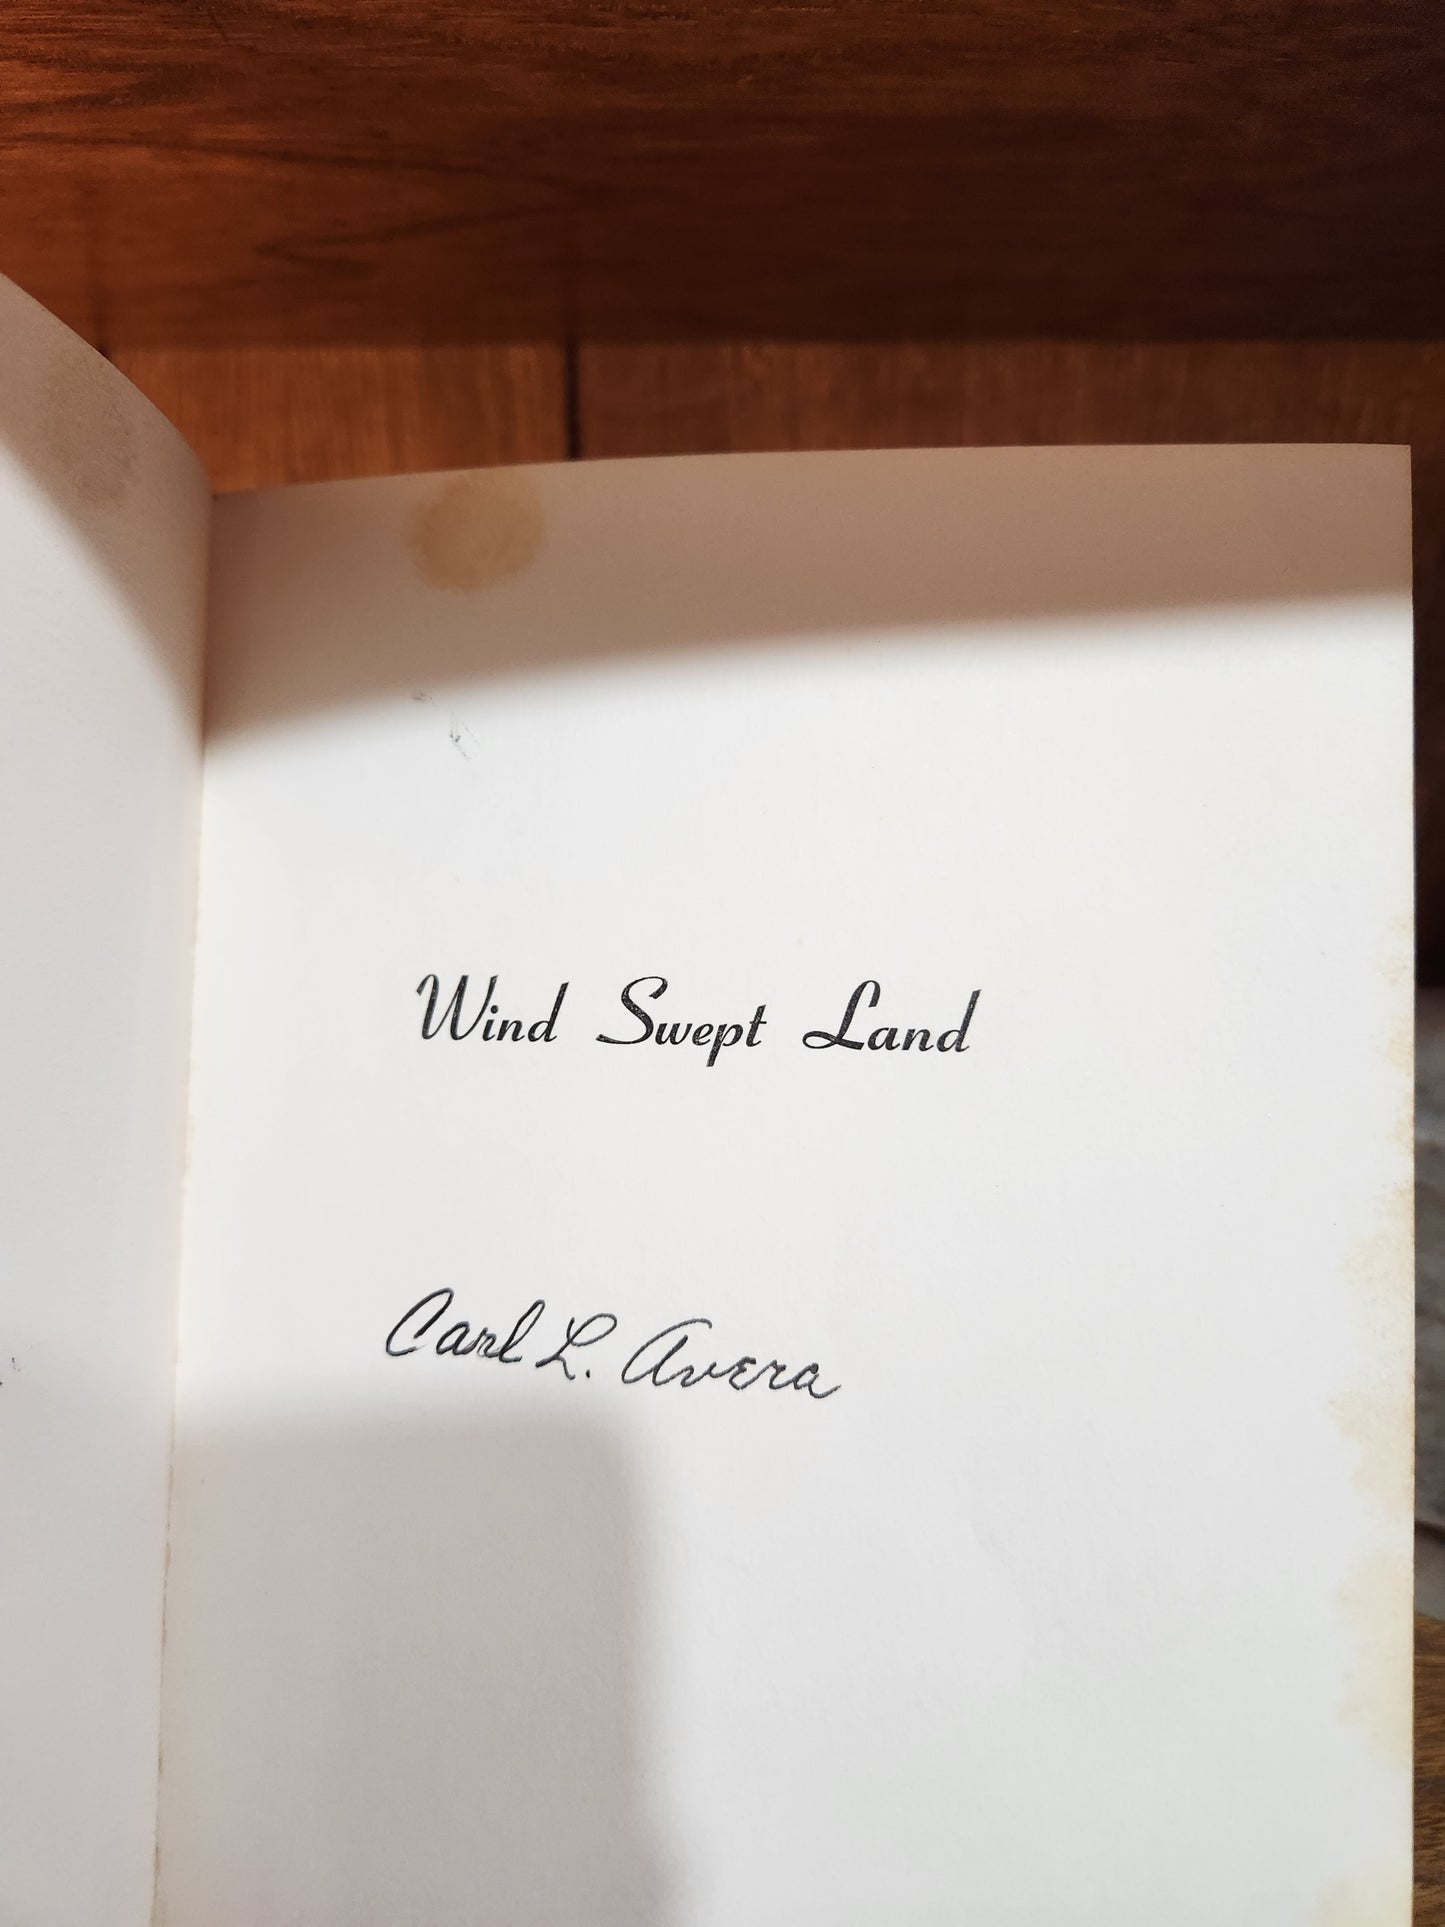 "Wind Swept Land" by Carl L Avera, Signed by the author.